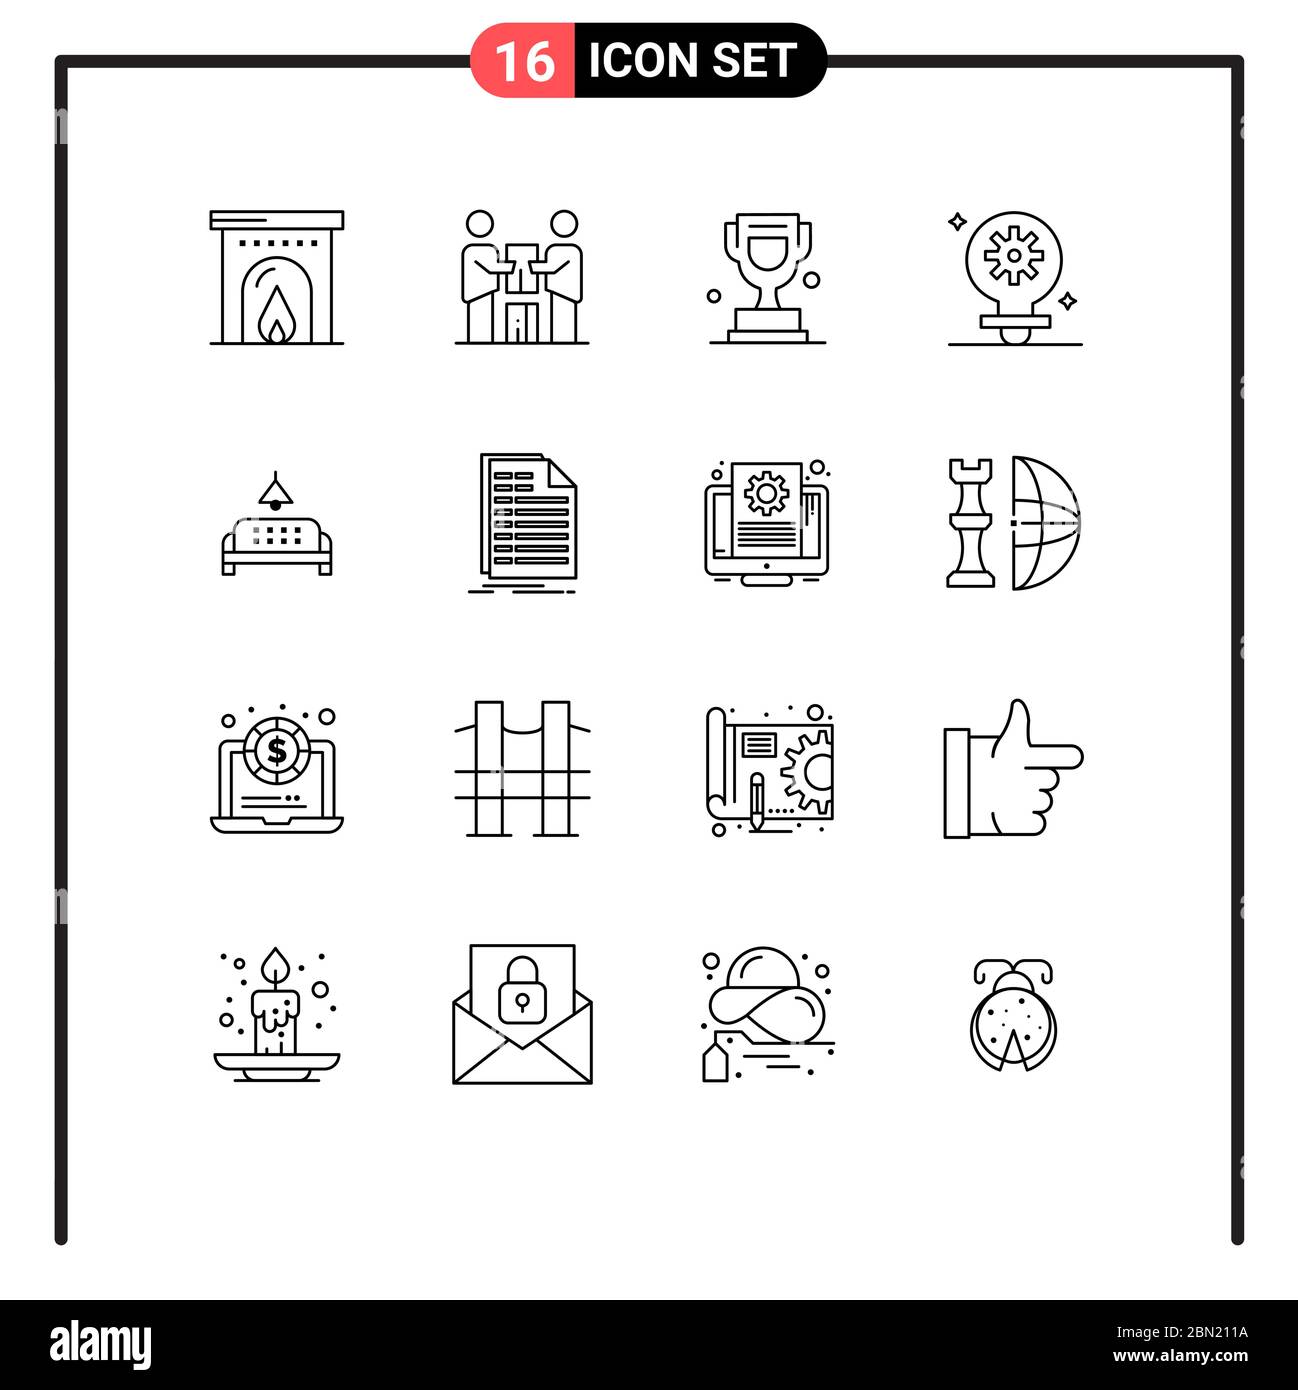 Group of 16 Outlines Signs and Symbols for furniture, gear, award, setting, bulb Editable Vector Design Elements Stock Vector